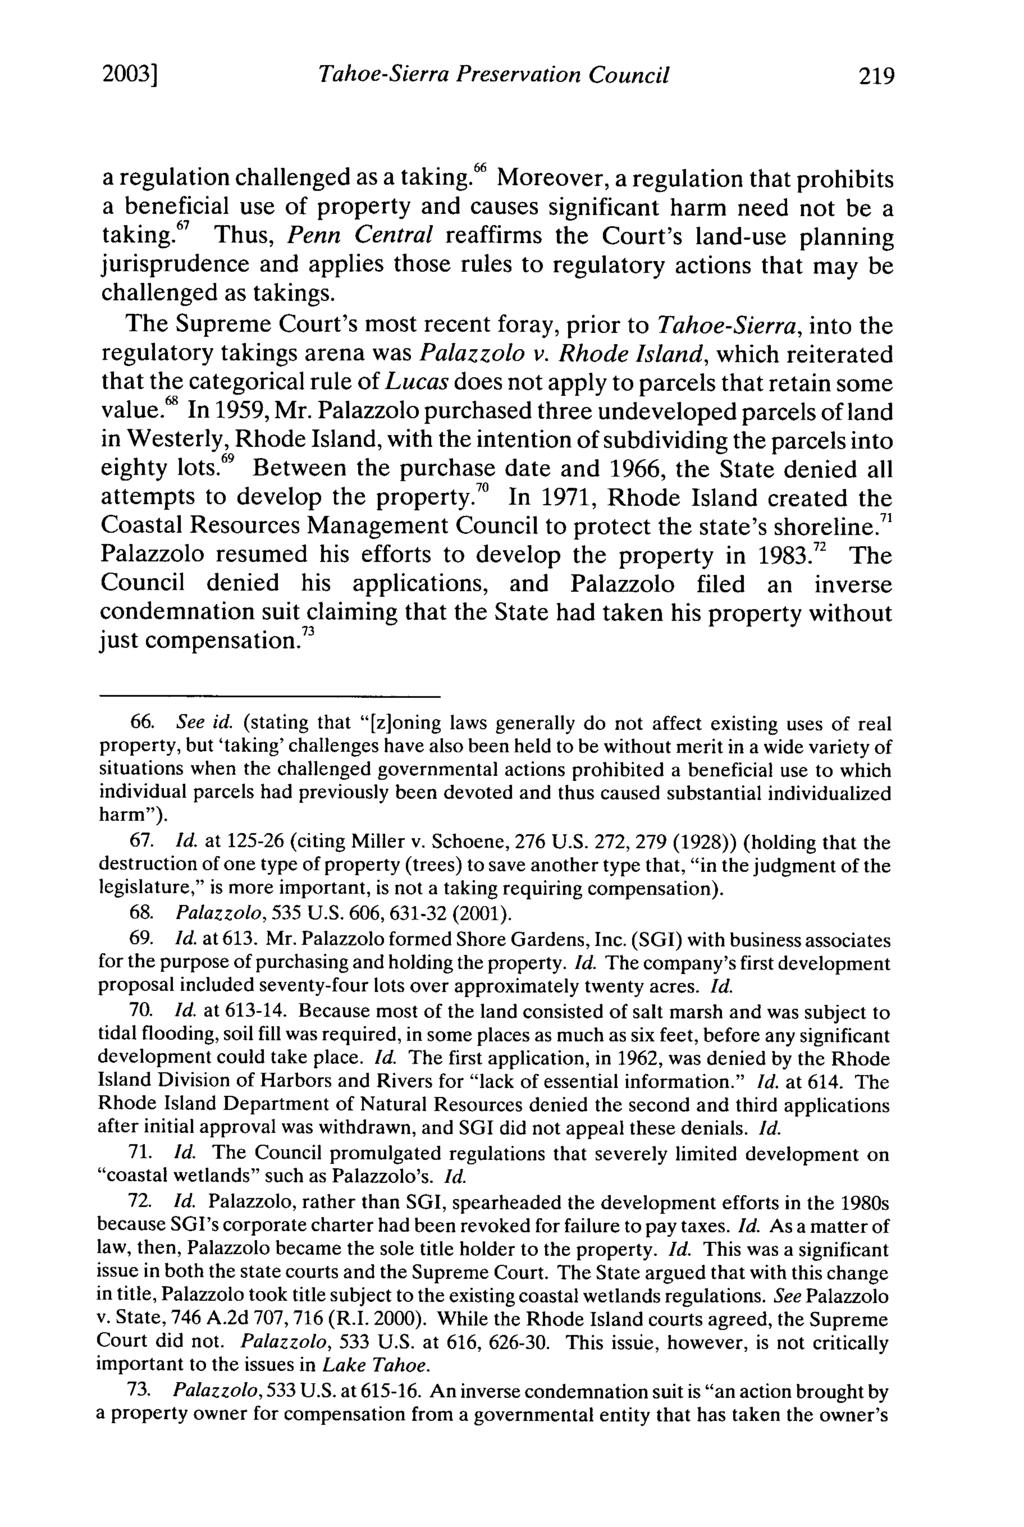 2003] Tahoe-Sierra Preservation Council a regulation challenged as a taking. 66 Moreover, a regulation that prohibits a beneficial use of property and causes significant harm need not be a taking.